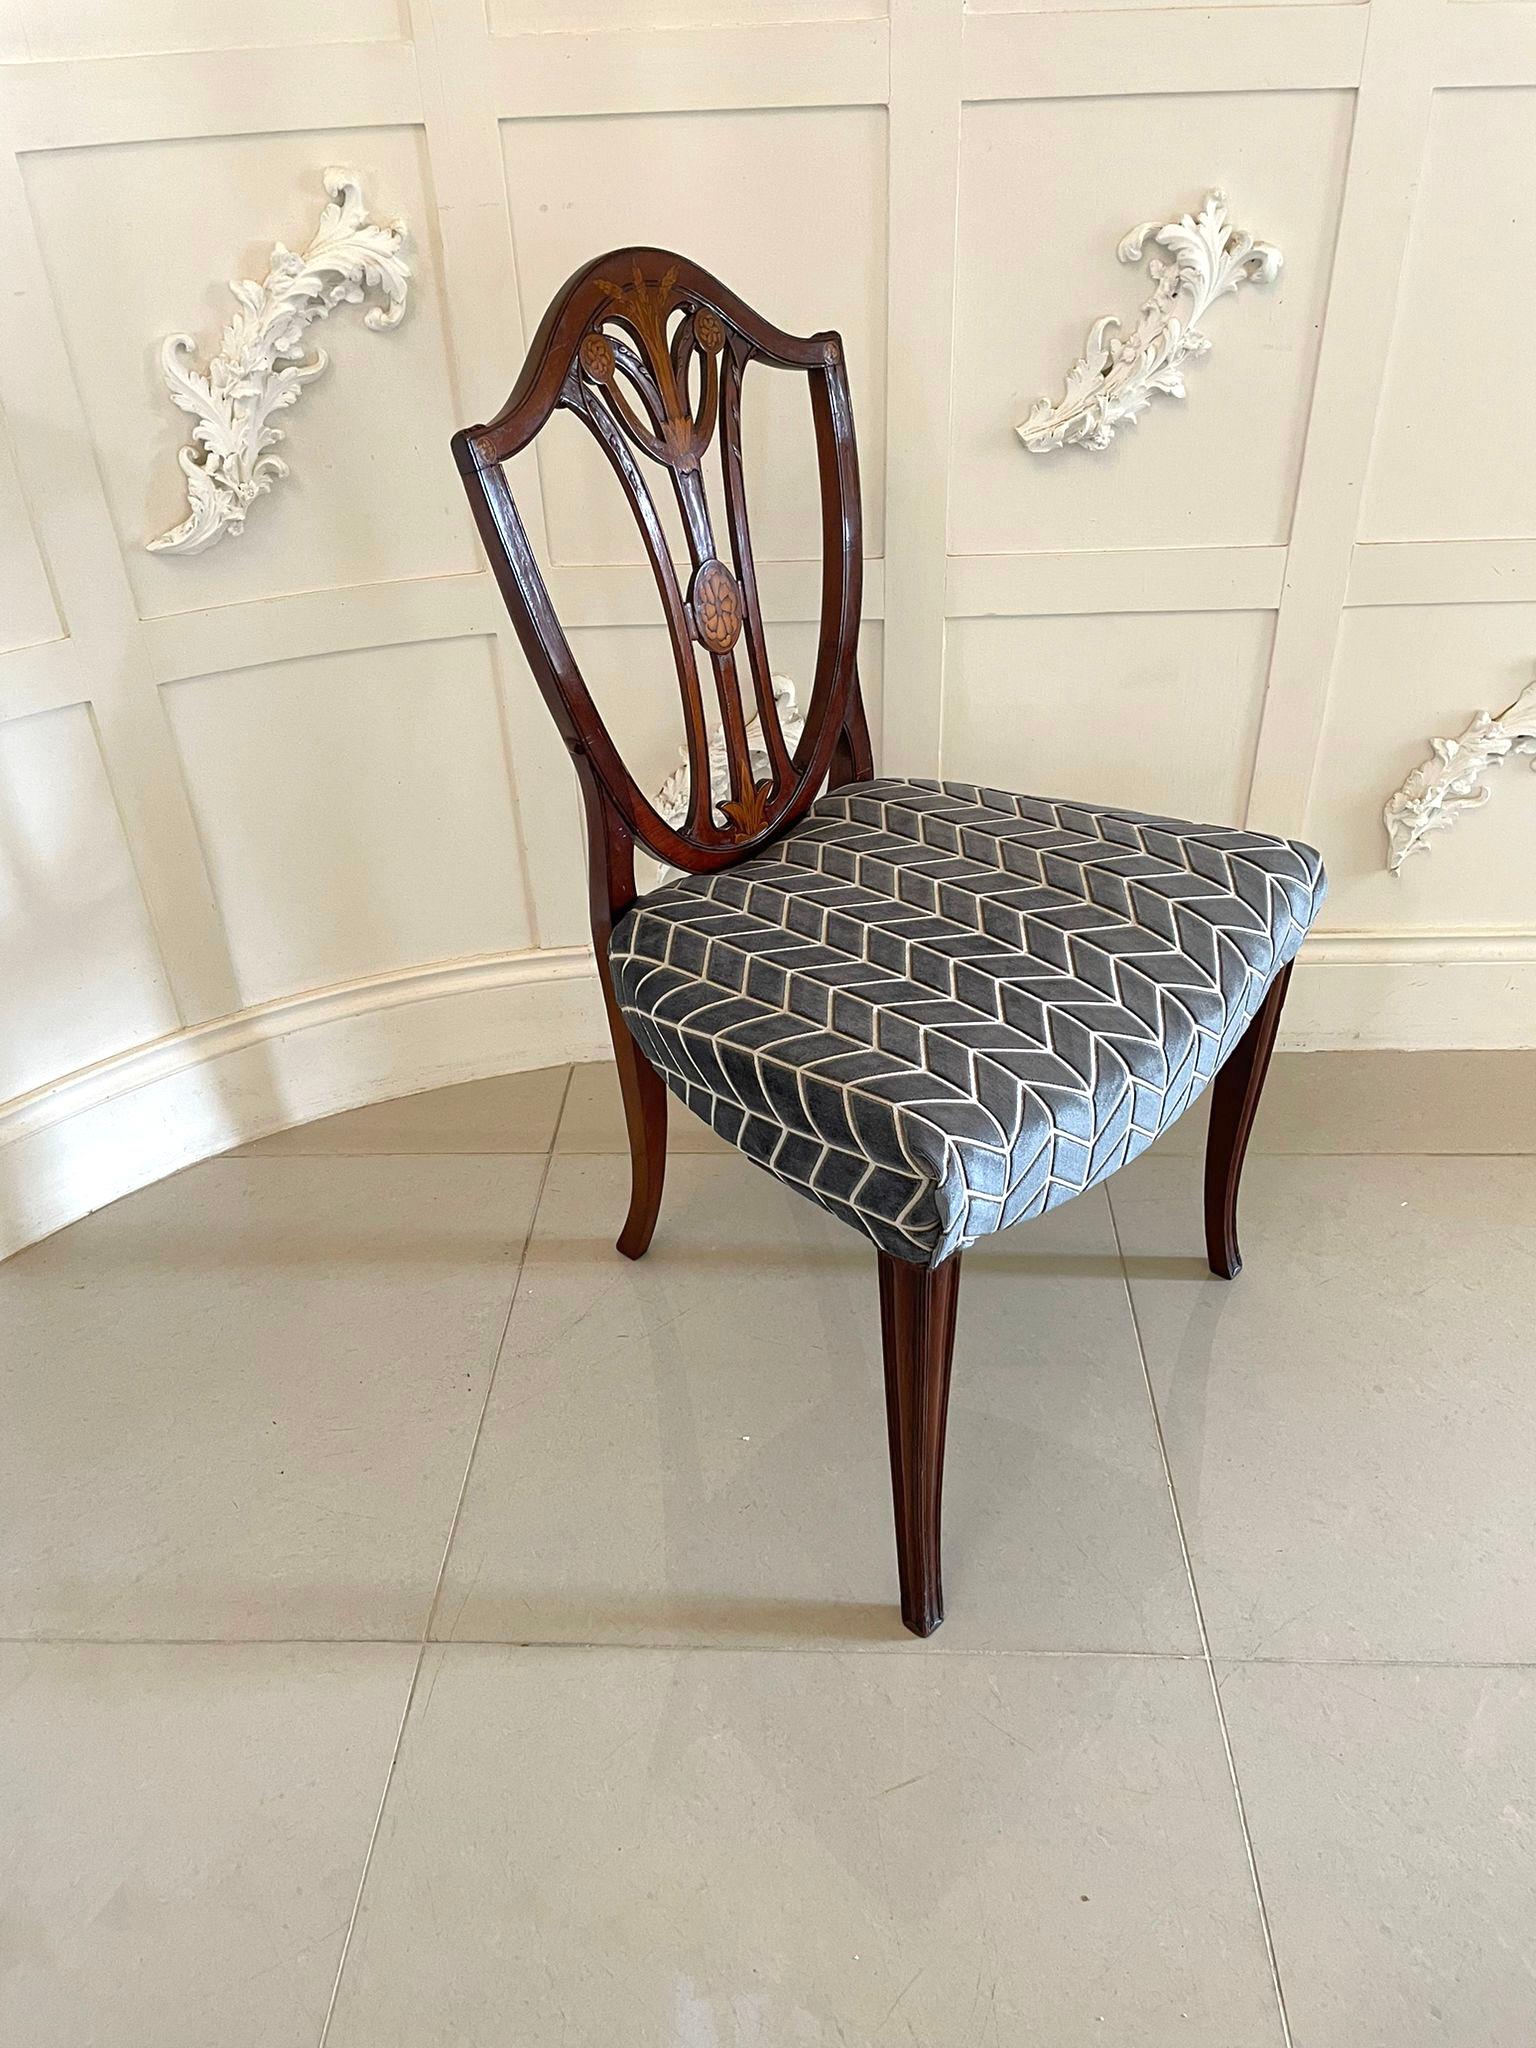 Fine quality set of six antique Victorian mahogany inlaid dining chairs having a fine quality mahogany inlaid back with a shaped top, fantastic pierced carved satinwood inlaid centre splat, newly reupholstered seats in a quality fabric and standing